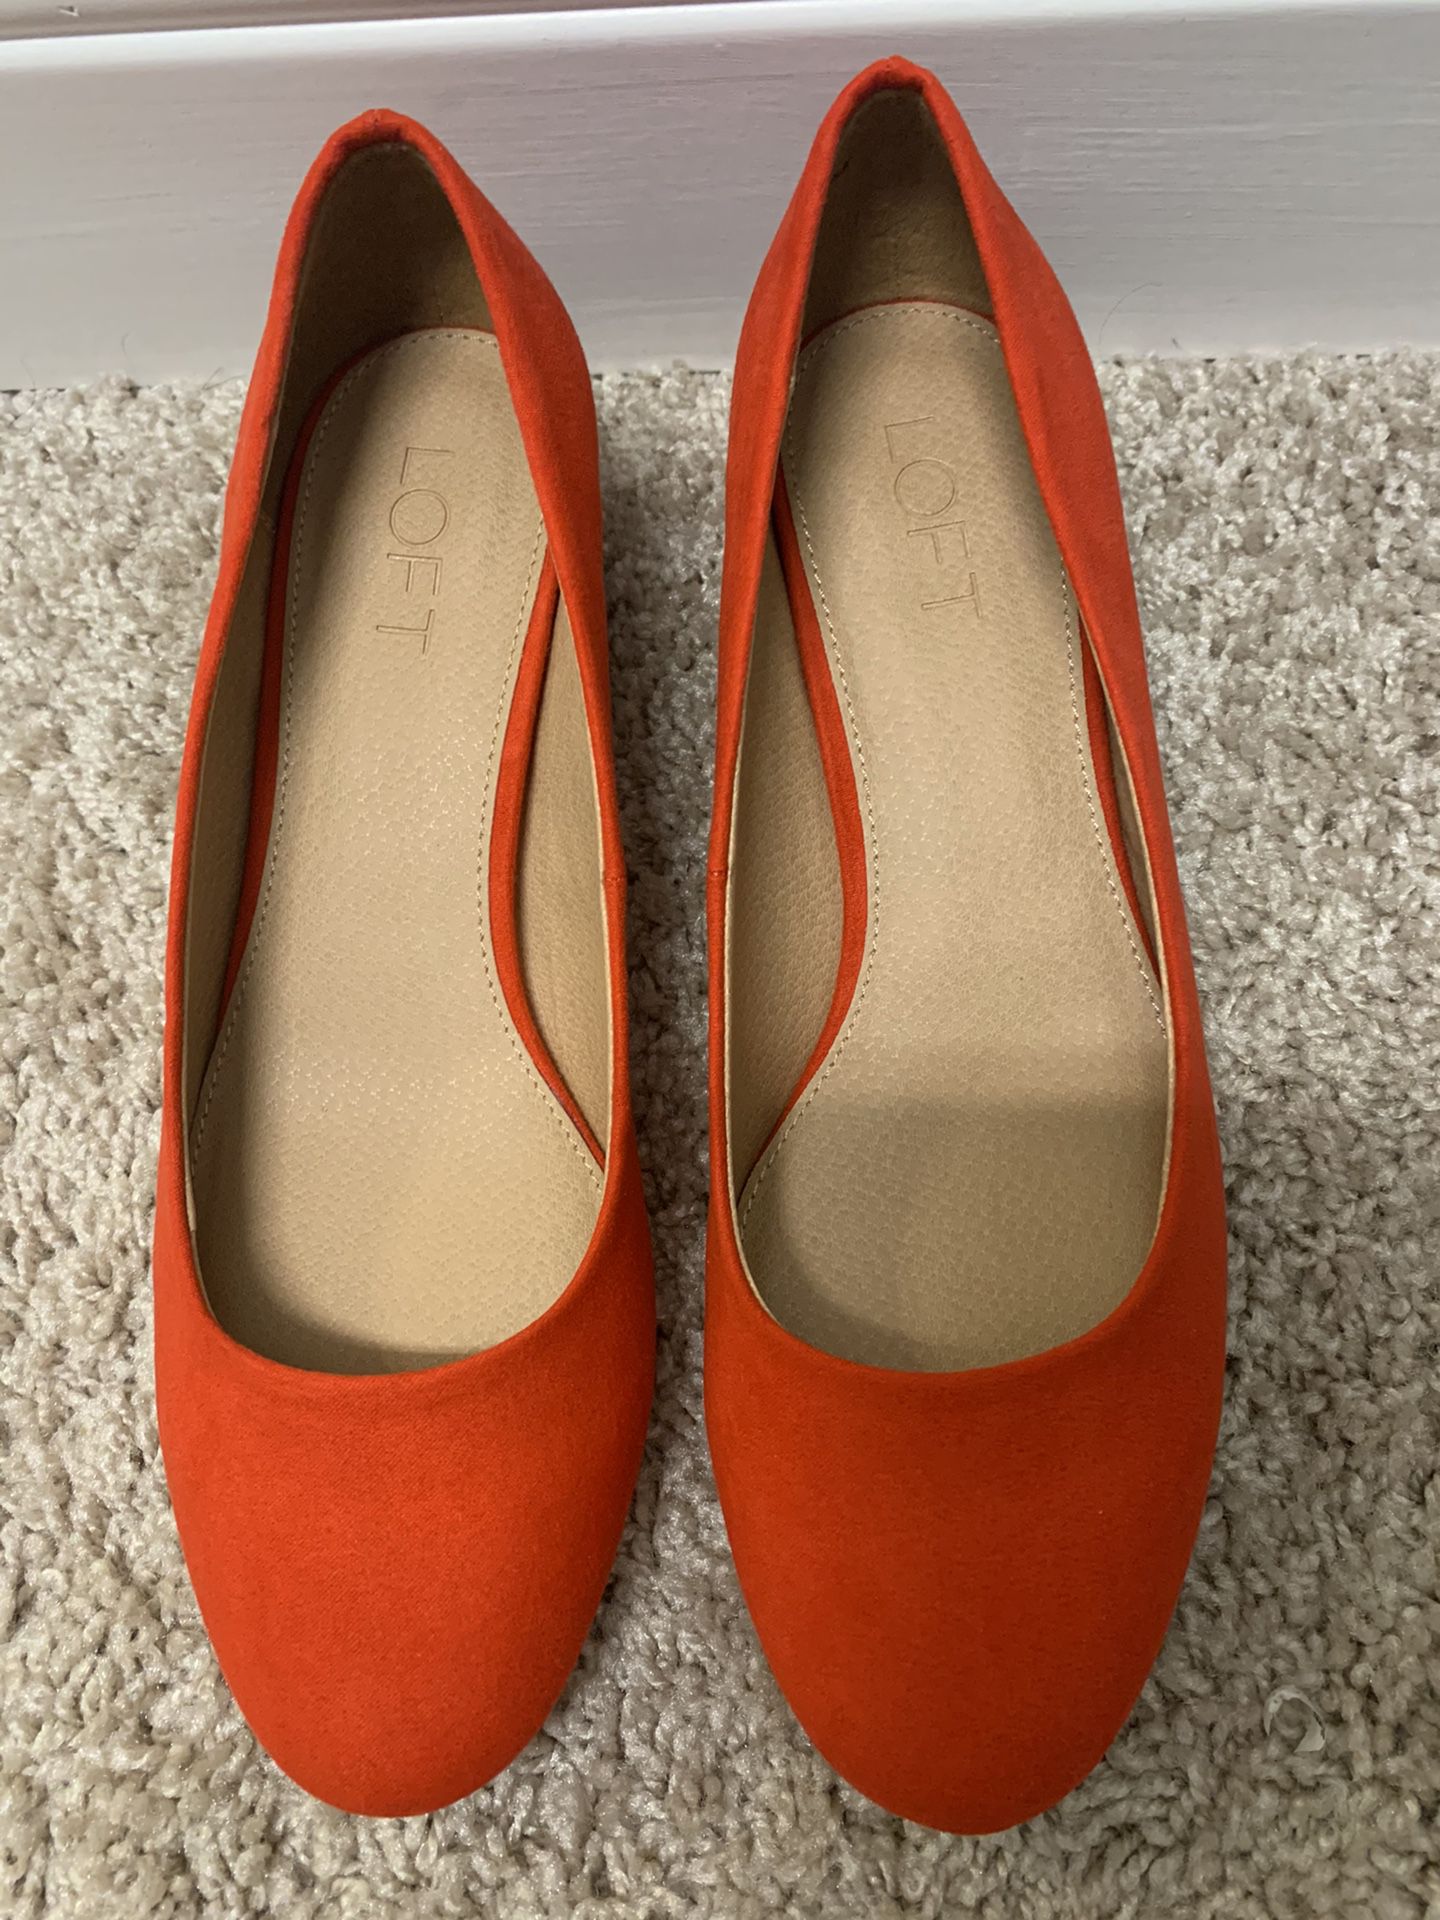 Loft shoes, new, bright red, size 7,mid heel.